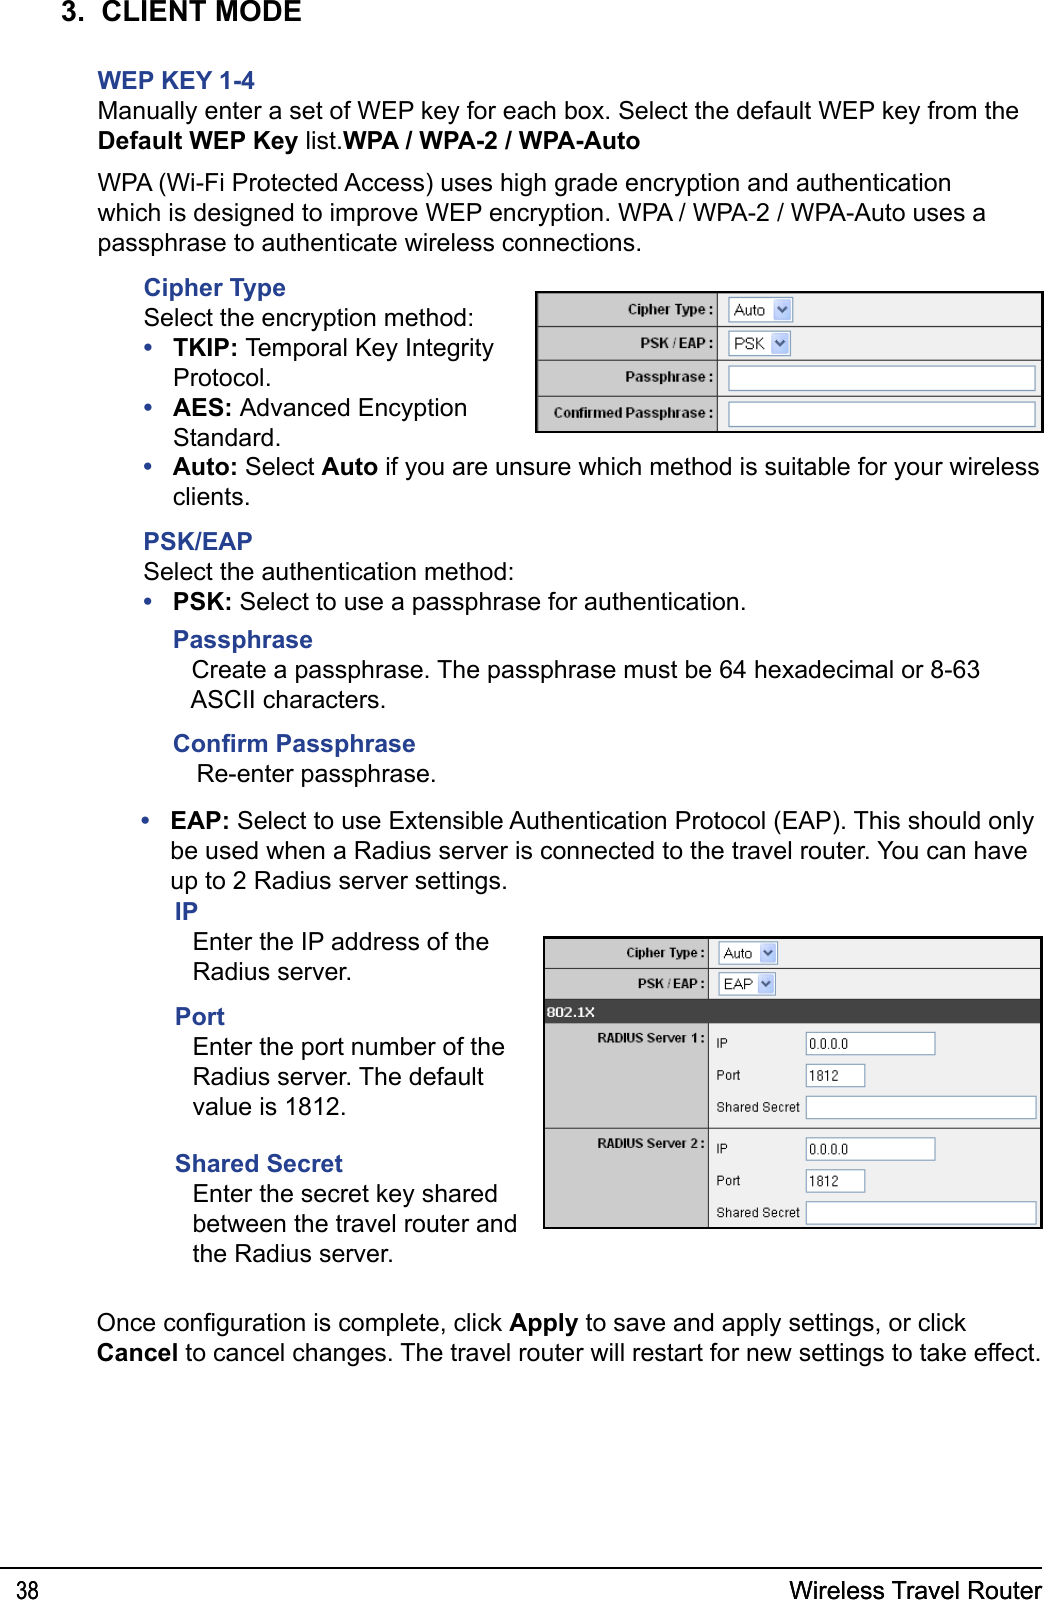 Wireless Travel Router38 Wireless Travel Router383.  CLIENT MODEWEP KEY 1-4Manually enter a set of WEP key for each box. Select the default WEP key from the Default WEP Key list.WPA / WPA-2 / WPA-AutoWPA (Wi-Fi Protected Access) uses high grade encryption and authentication which is designed to improve WEP encryption. WPA / WPA-2 / WPA-Auto uses a passphrase to authenticate wireless connections.Cipher TypeSelect the encryption method:TKIP: Temporal Key Integrity Protocol.AES: Advanced Encyption Standard.••Auto: Select Auto if you are unsure which method is suitable for your wireless clients.PSK/EAPSelect the authentication method:PSK: Select to use a passphrase for authentication. ••EAP: Select to use Extensible Authentication Protocol (EAP). This should only be used when a Radius server is connected to the travel router. You can have up to 2 Radius server settings.•IPEnter the IP address of the Radius server. PortEnter the port number of the Radius server. The default value is 1812.Shared SecretEnter the secret key shared between the travel router and the Radius server.Once conguration is complete, click Apply to save and apply settings, or click Cancel to cancel changes. The travel router will restart for new settings to take effect.Passphrase Create a passphrase. The passphrase must be 64 hexadecimal or 8-63 ASCII characters.Conrm PassphraseRe-enter passphrase.